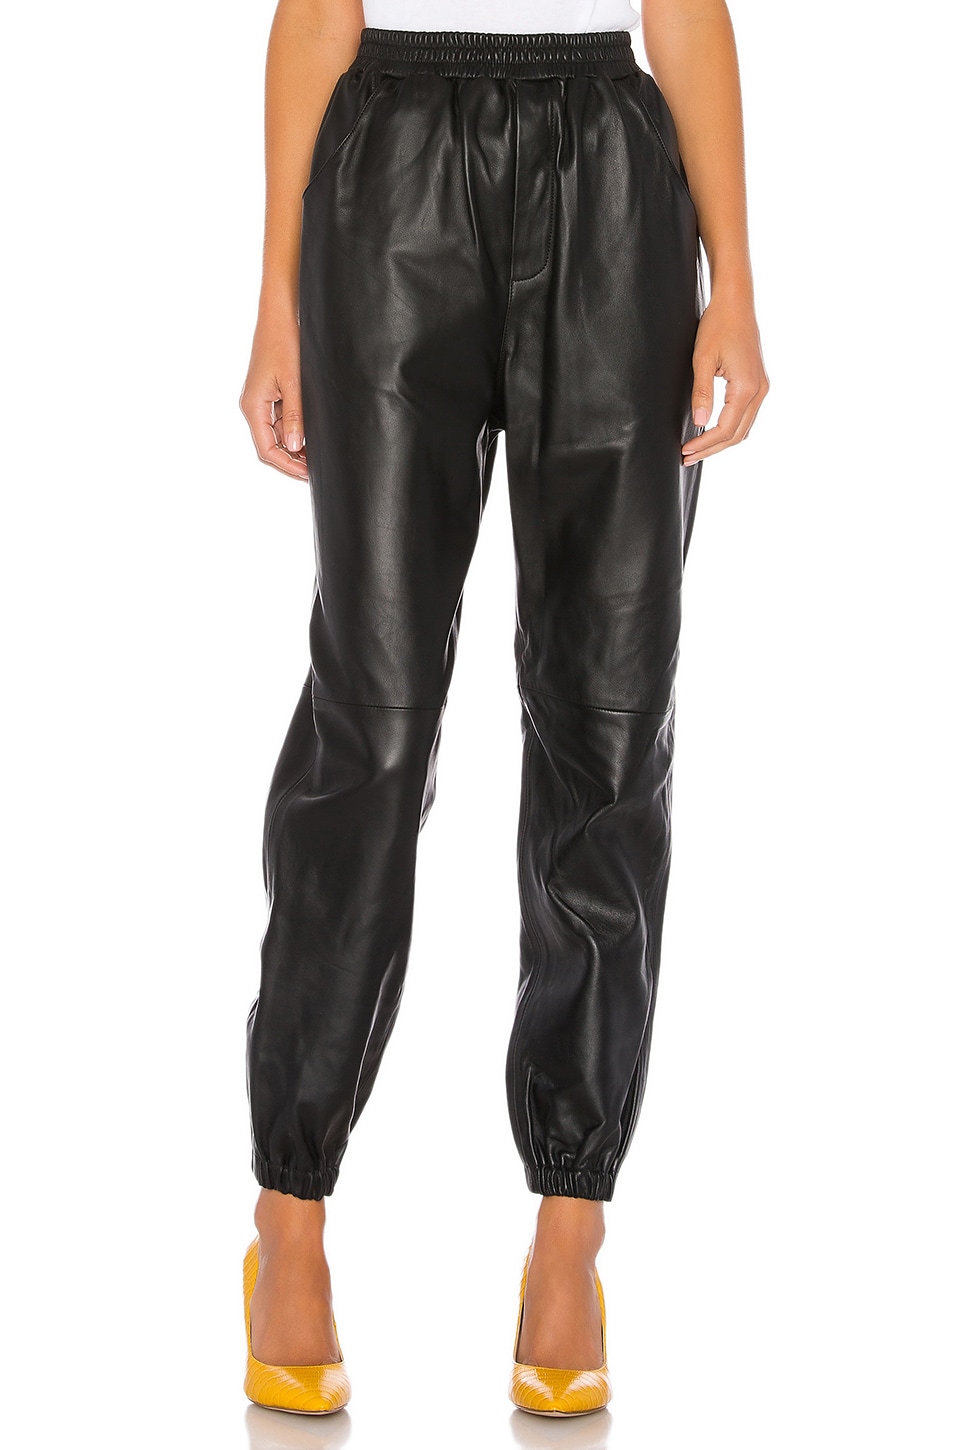 L'Academie Tracey Leather Joggers in Black | REVOLVE